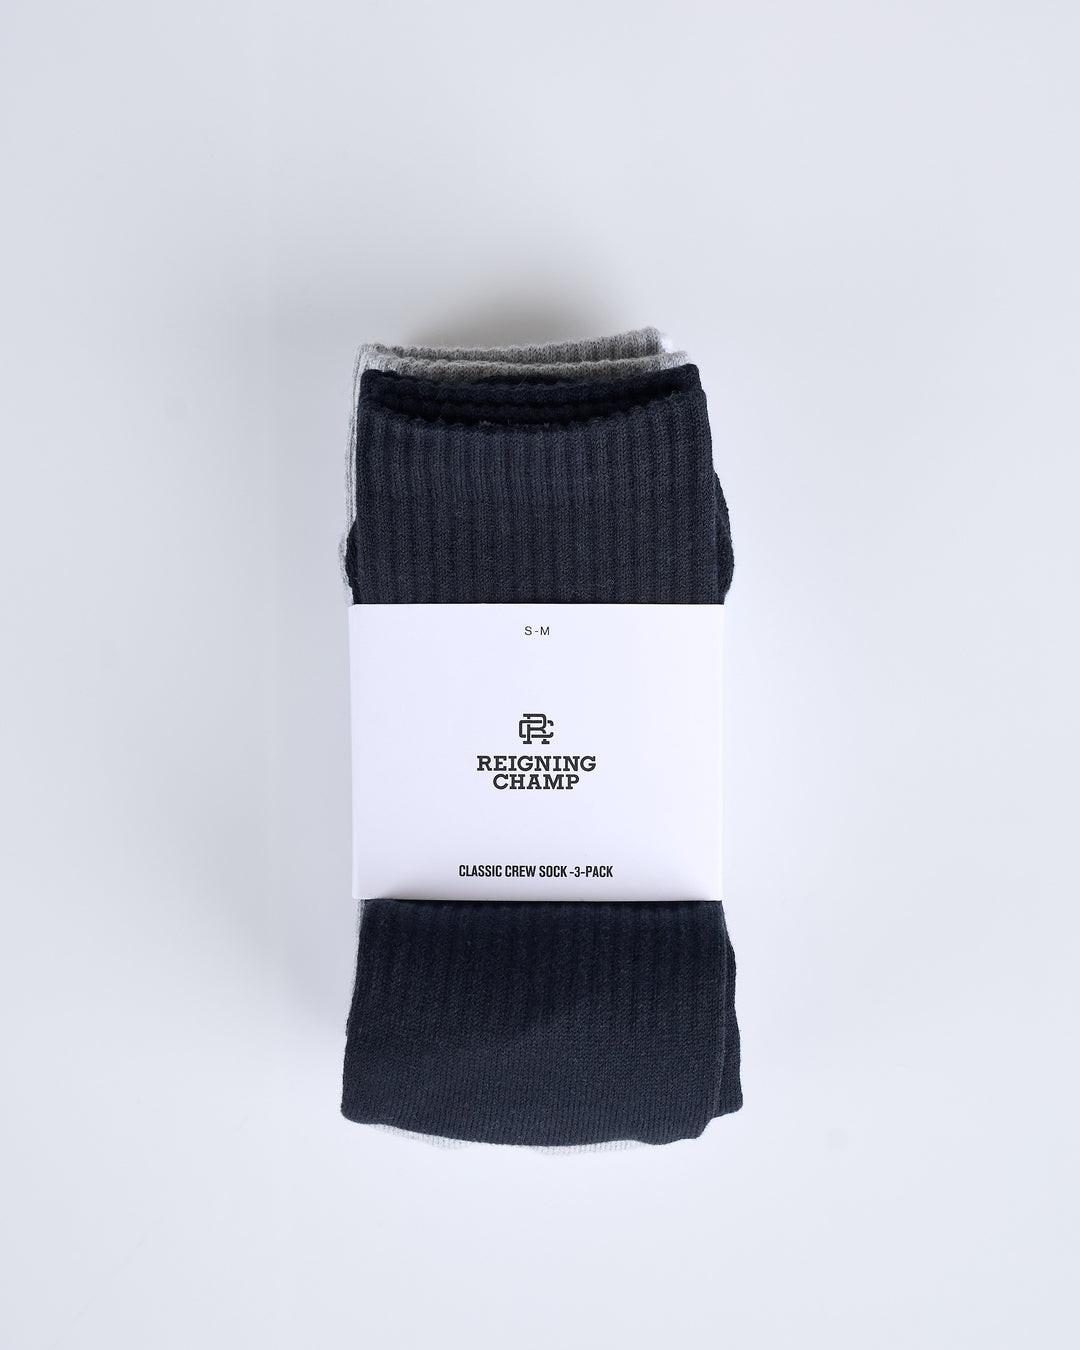 Reigning Champ Knit 3-Pack Classic Crew Sock Black/H.Grey/White